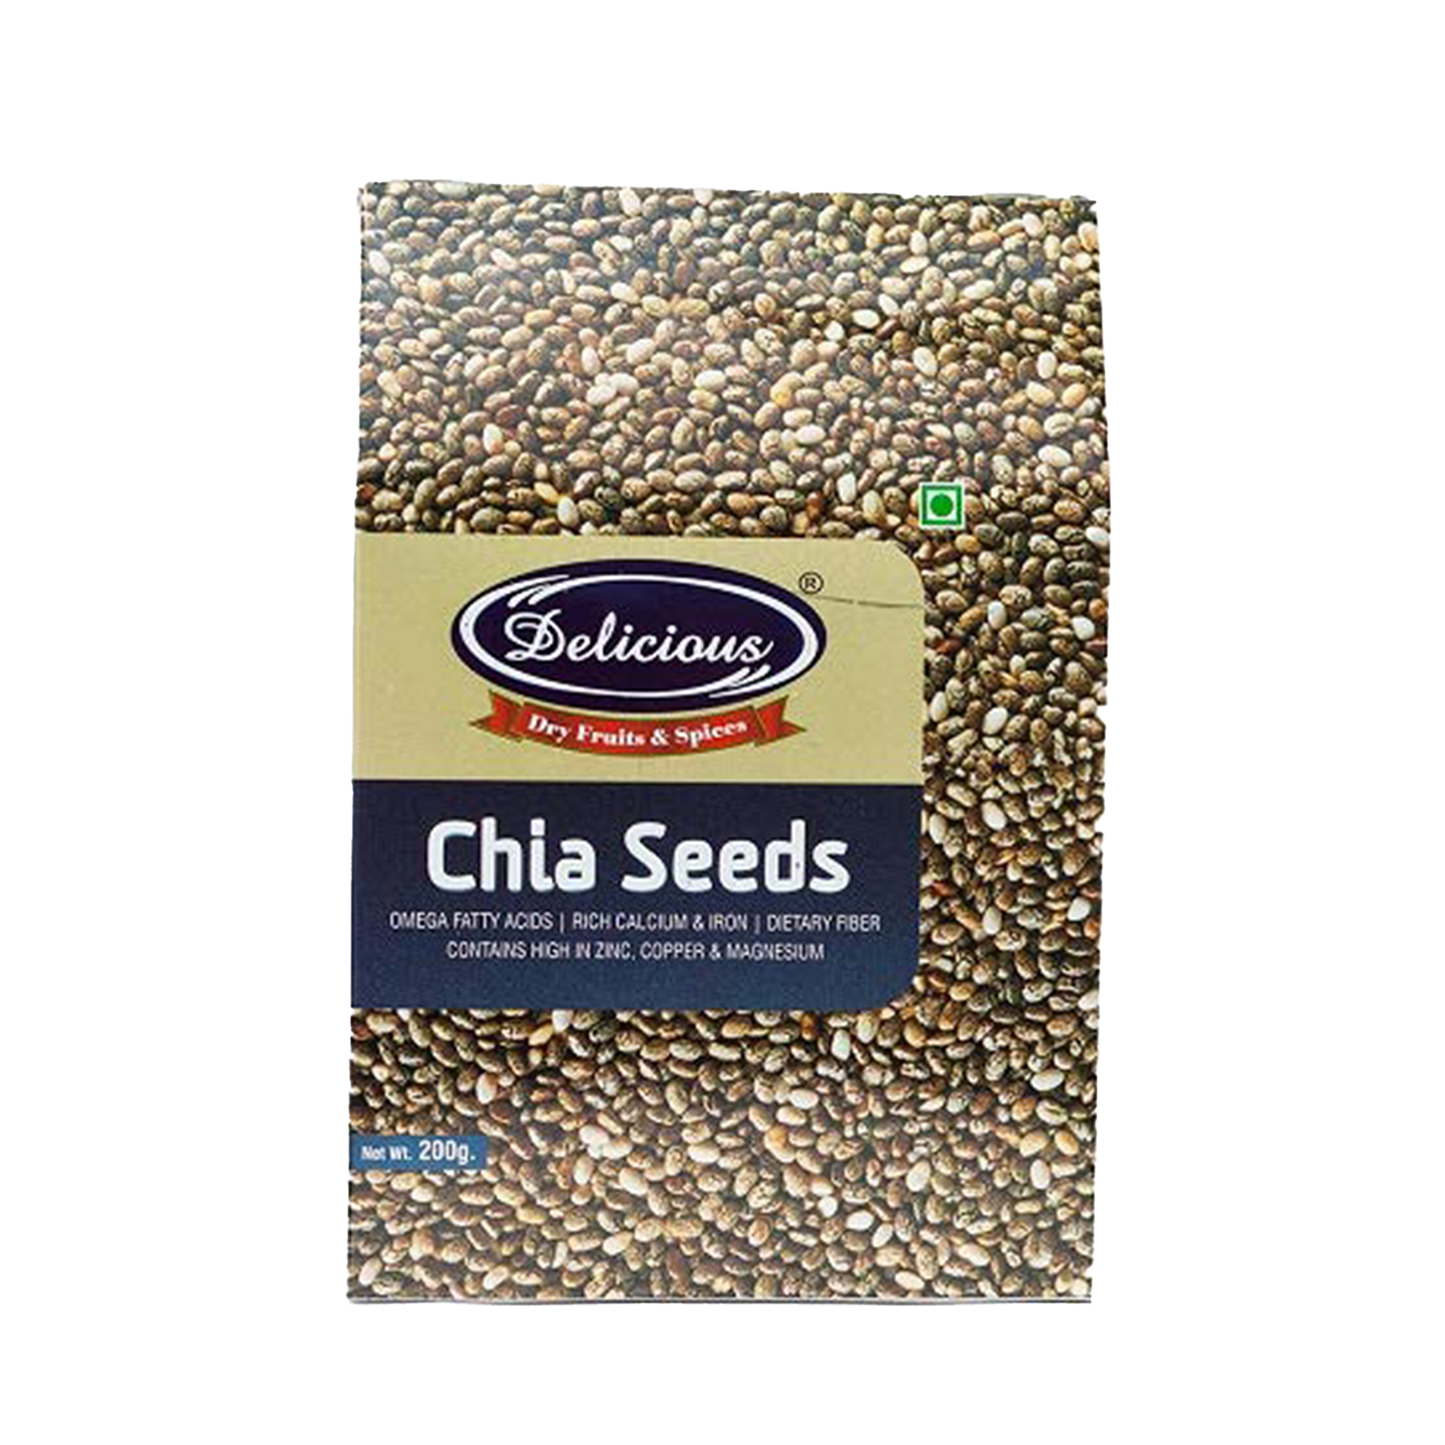 Delicious Chia Seeds